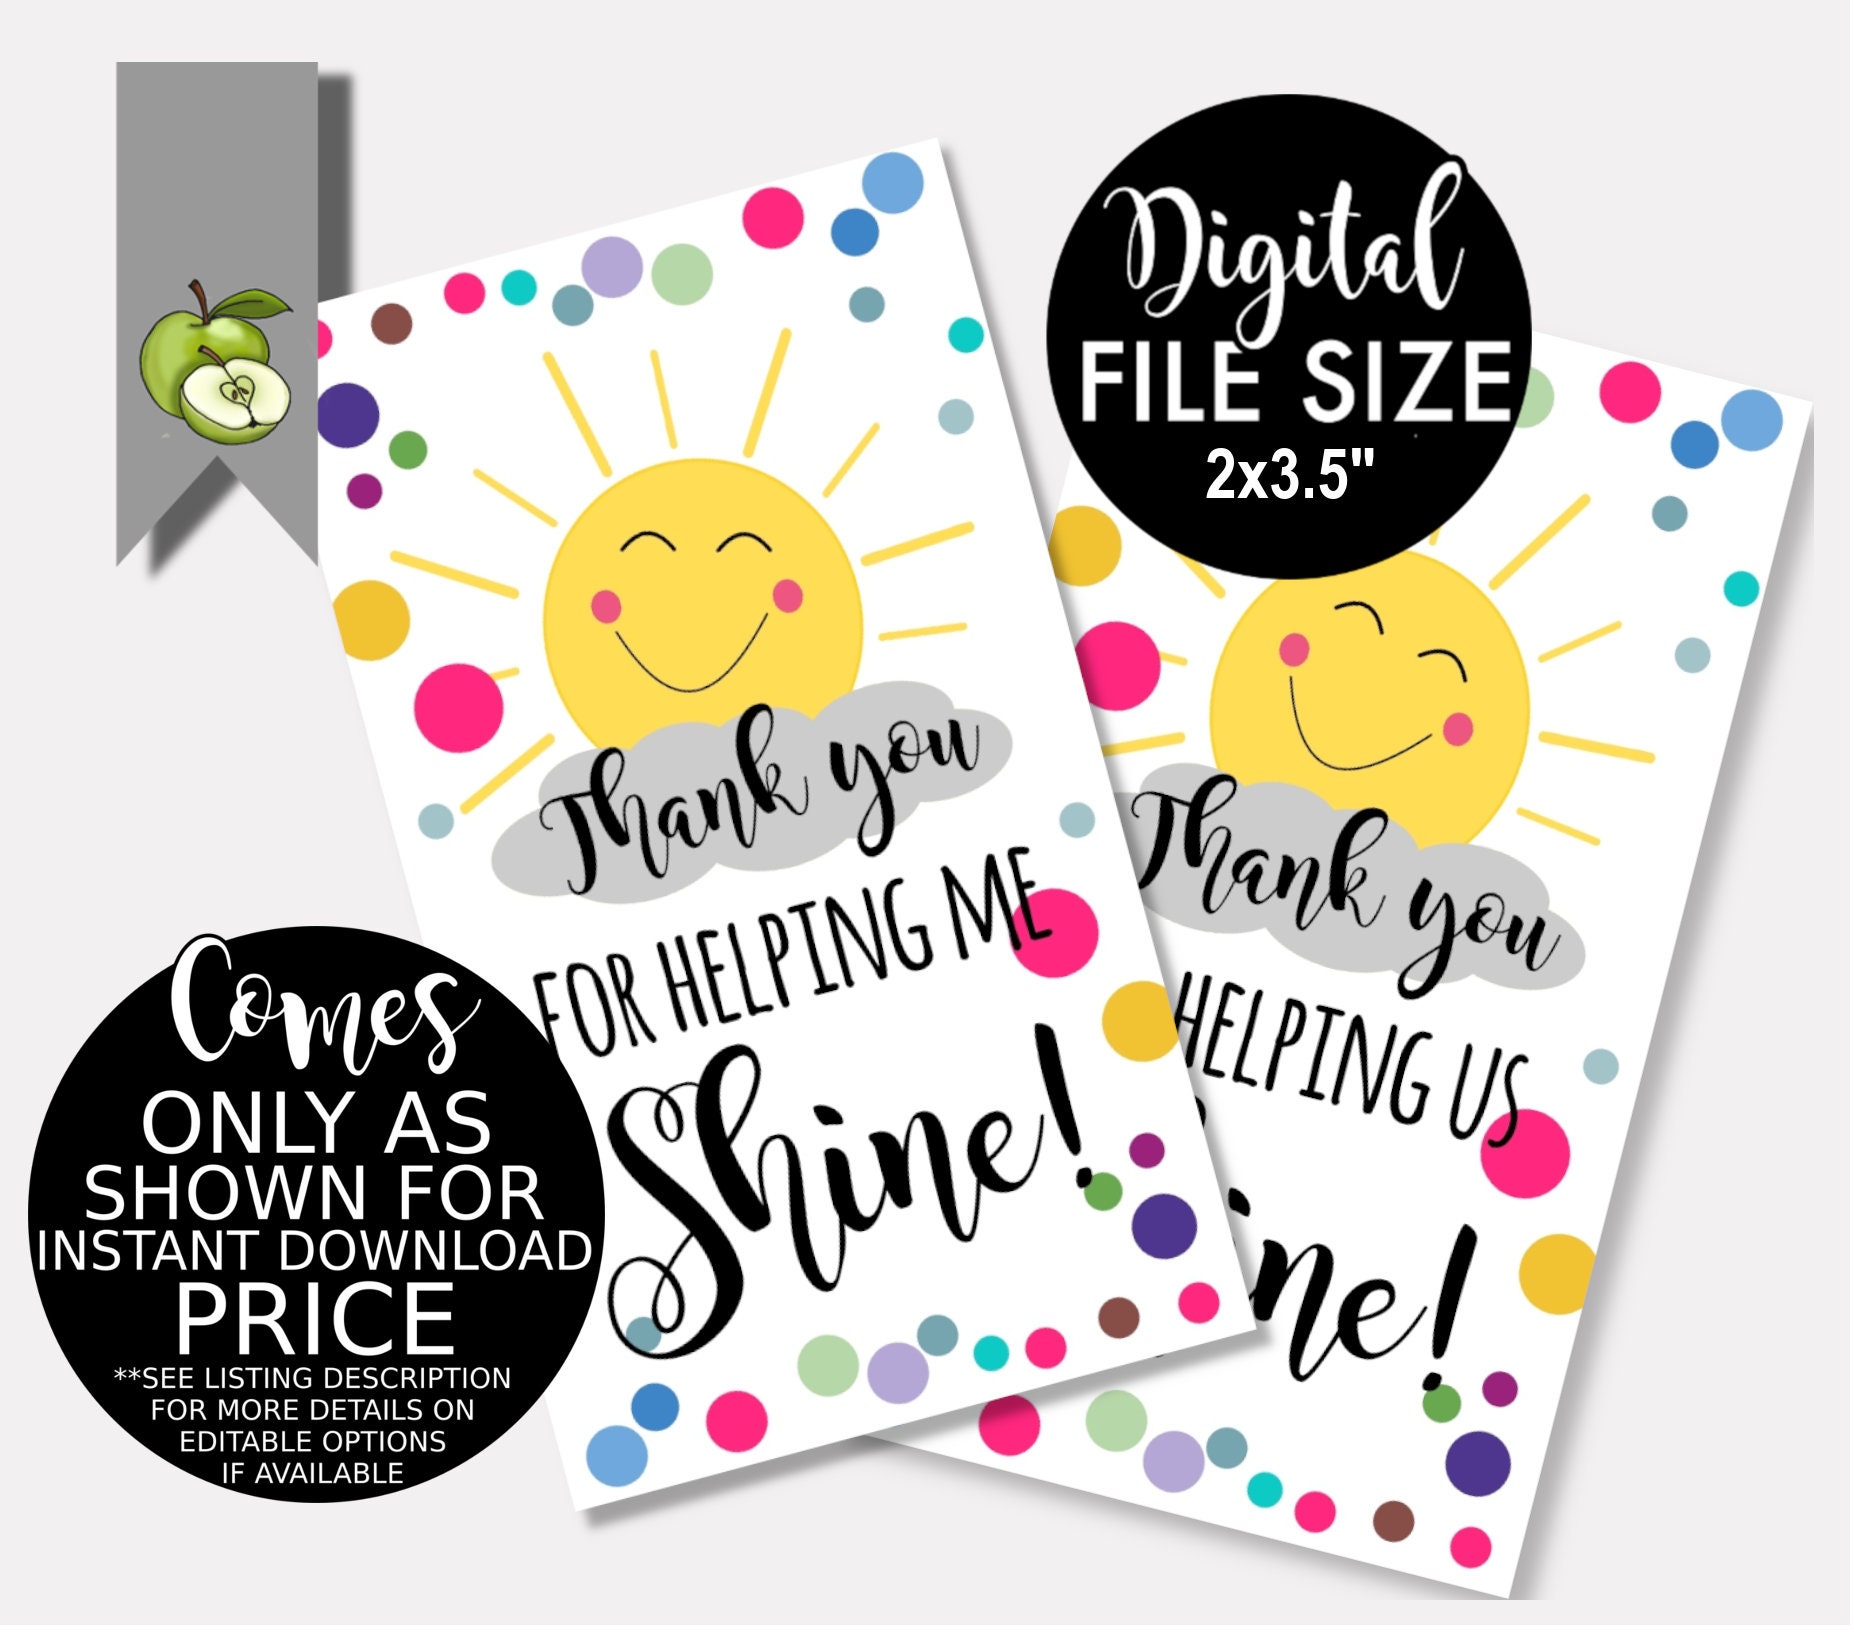 Teacher Thank You Card Thank You For Helping Me Shine. Personalised